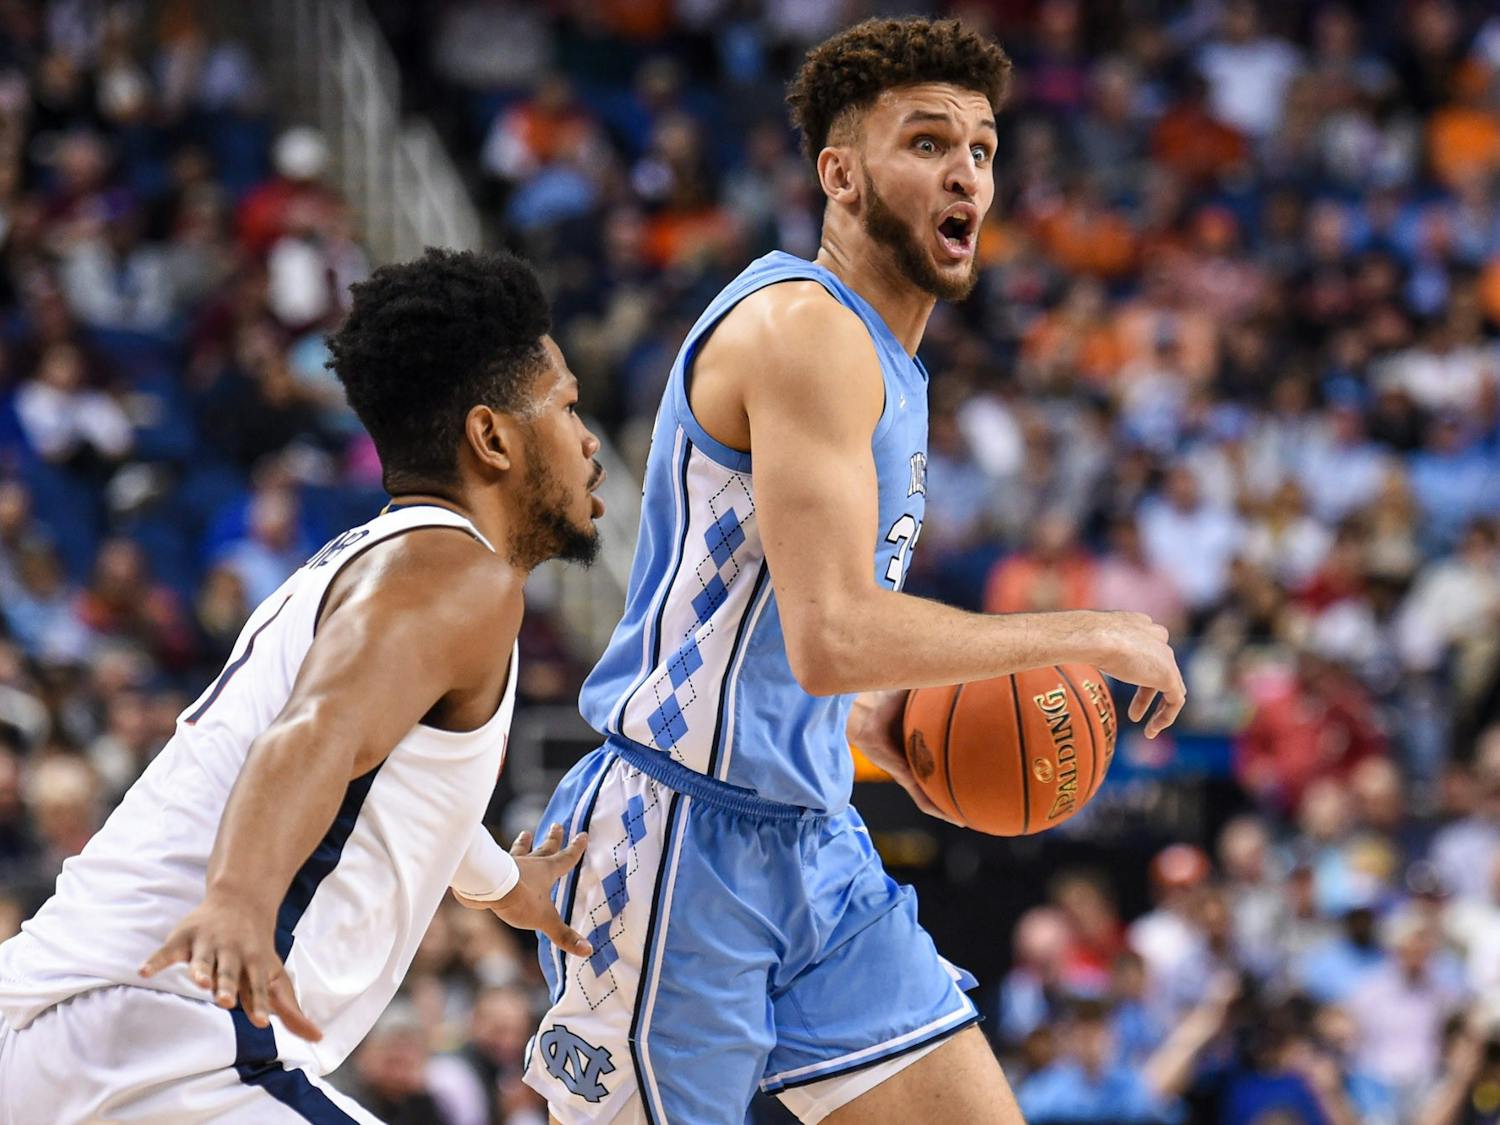 UNC graduate forward Pete Nance (32) directs his teammates during the game against Virginia in the ACC Tournament Quarterfinals at Greensboro Coliseum on March 9, 2023. UNC fell to Virginia 68-59.